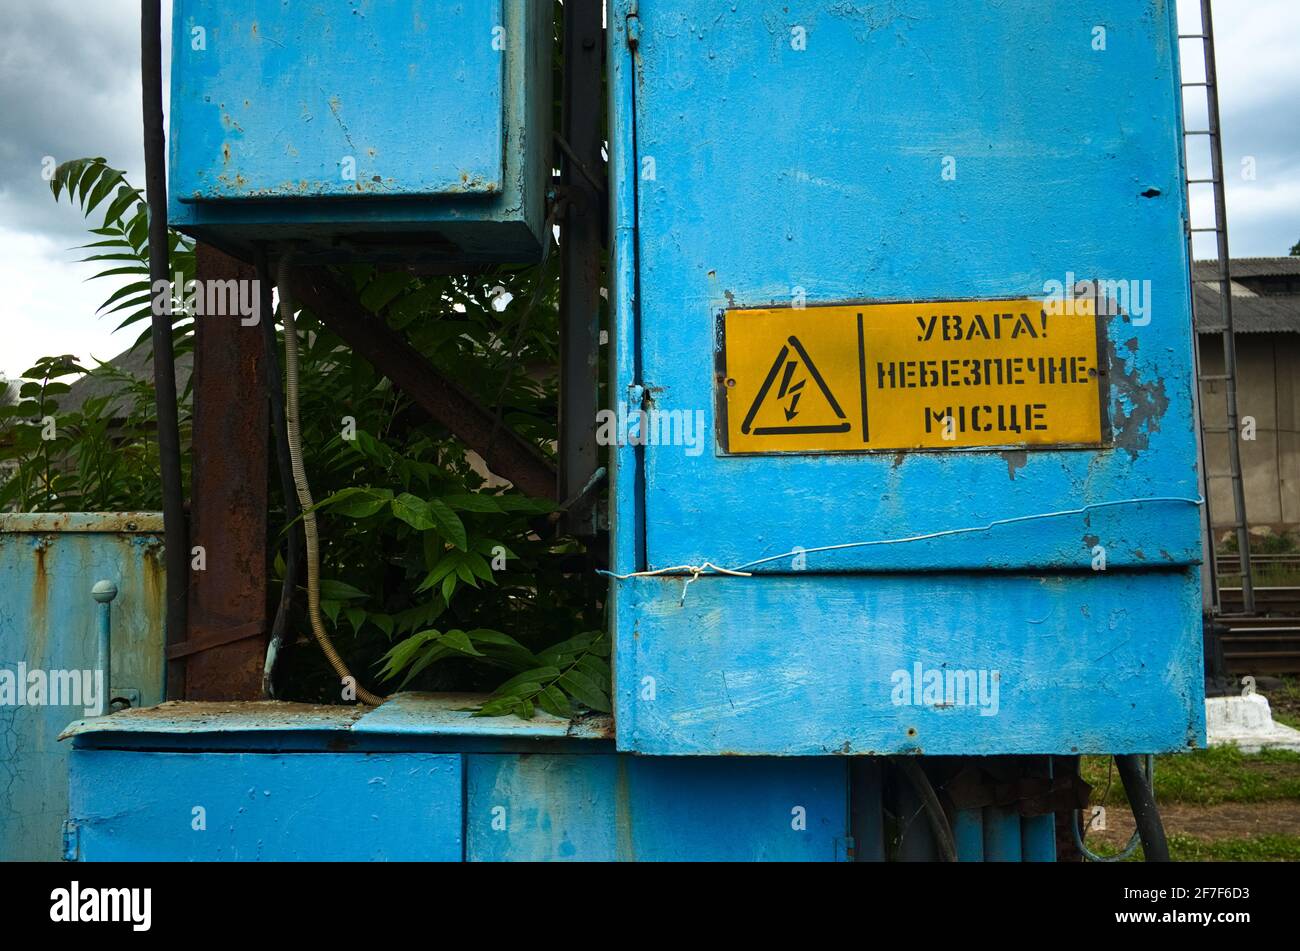 Old high voltage transformer sign on blue metal board. Electric power box near railroad tracks with danger triangle sign and caution notice on yellow Stock Photo